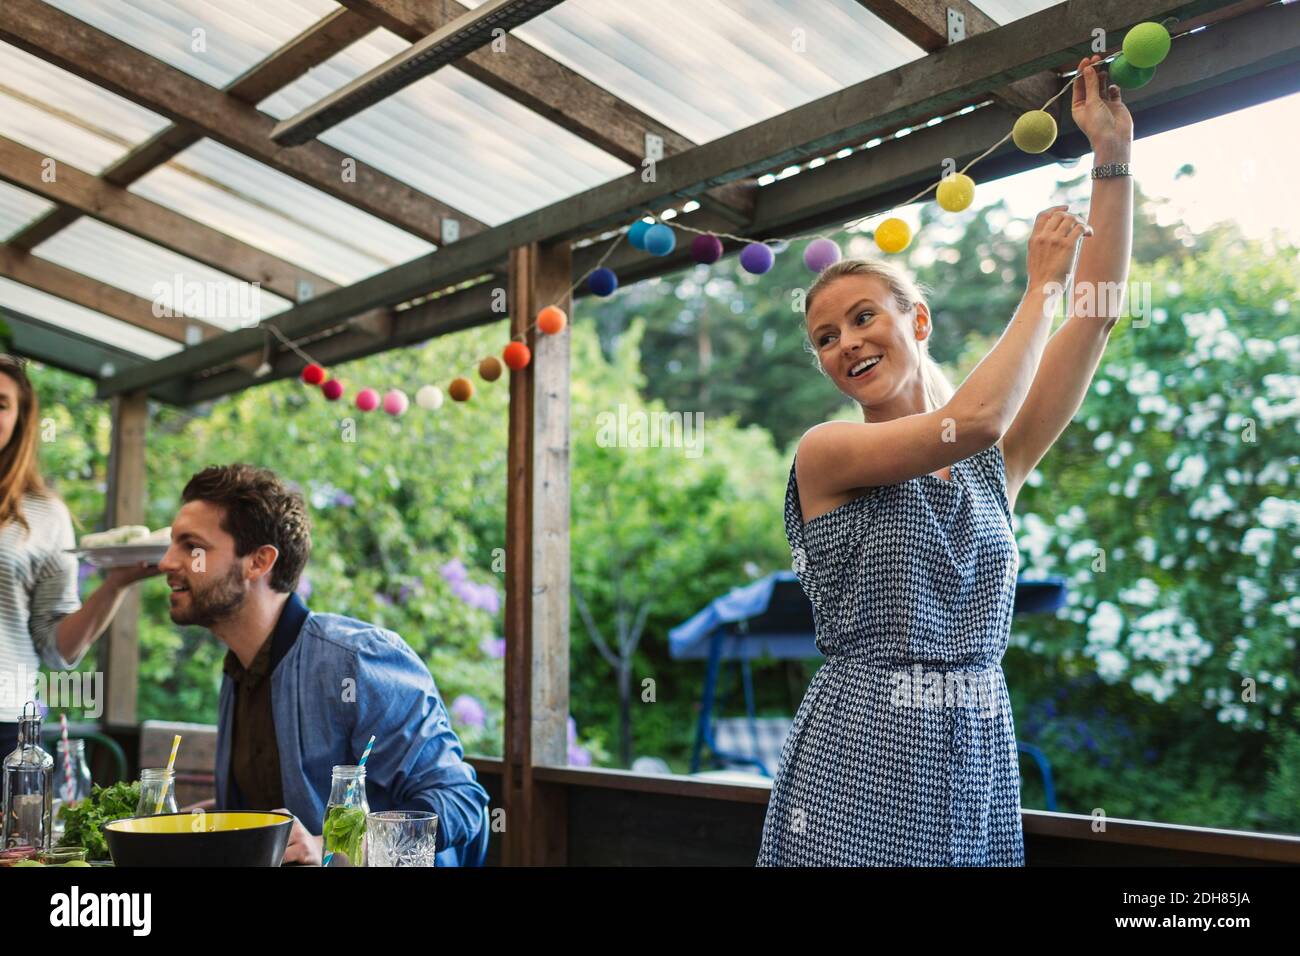 Happy young woman decorating log cabin during summer party with friends Stock Photo